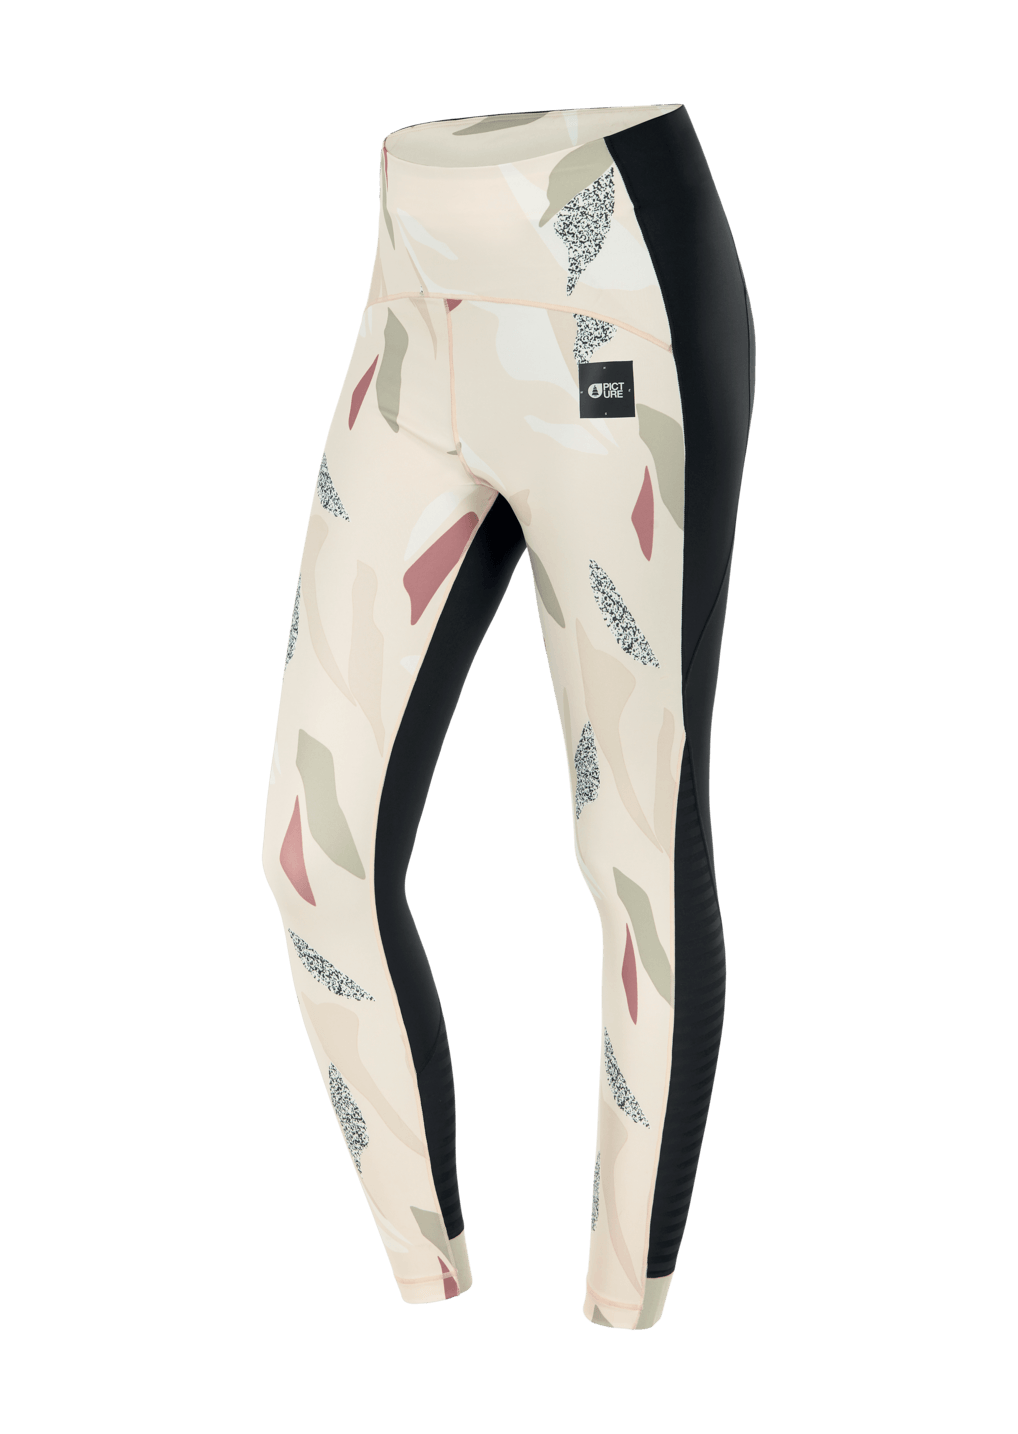 Picture Organic Women's Cidelle 7/8 Tech Leggings - Recycled Polyester, LT petals / M/L